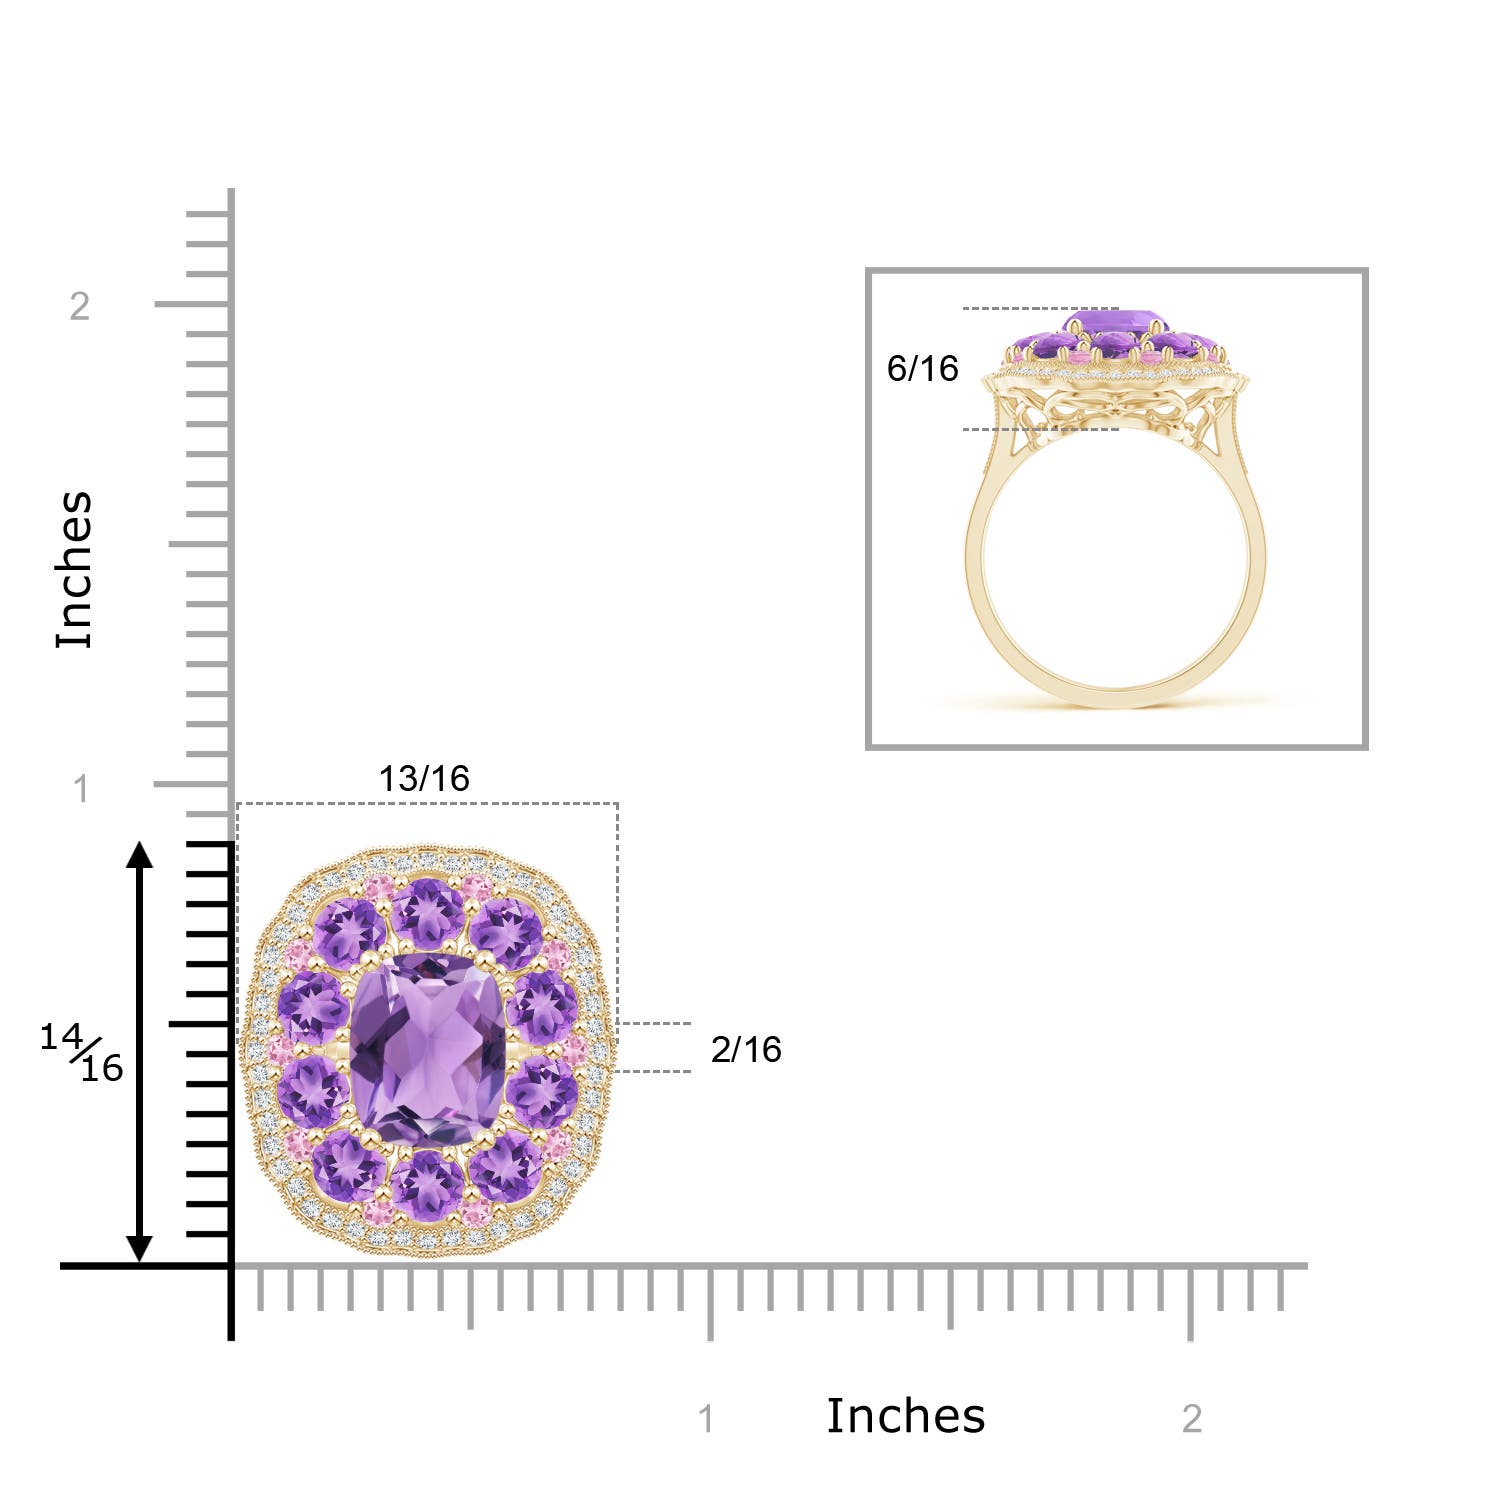 A - Amethyst / 5.85 CT / 14 KT Yellow Gold